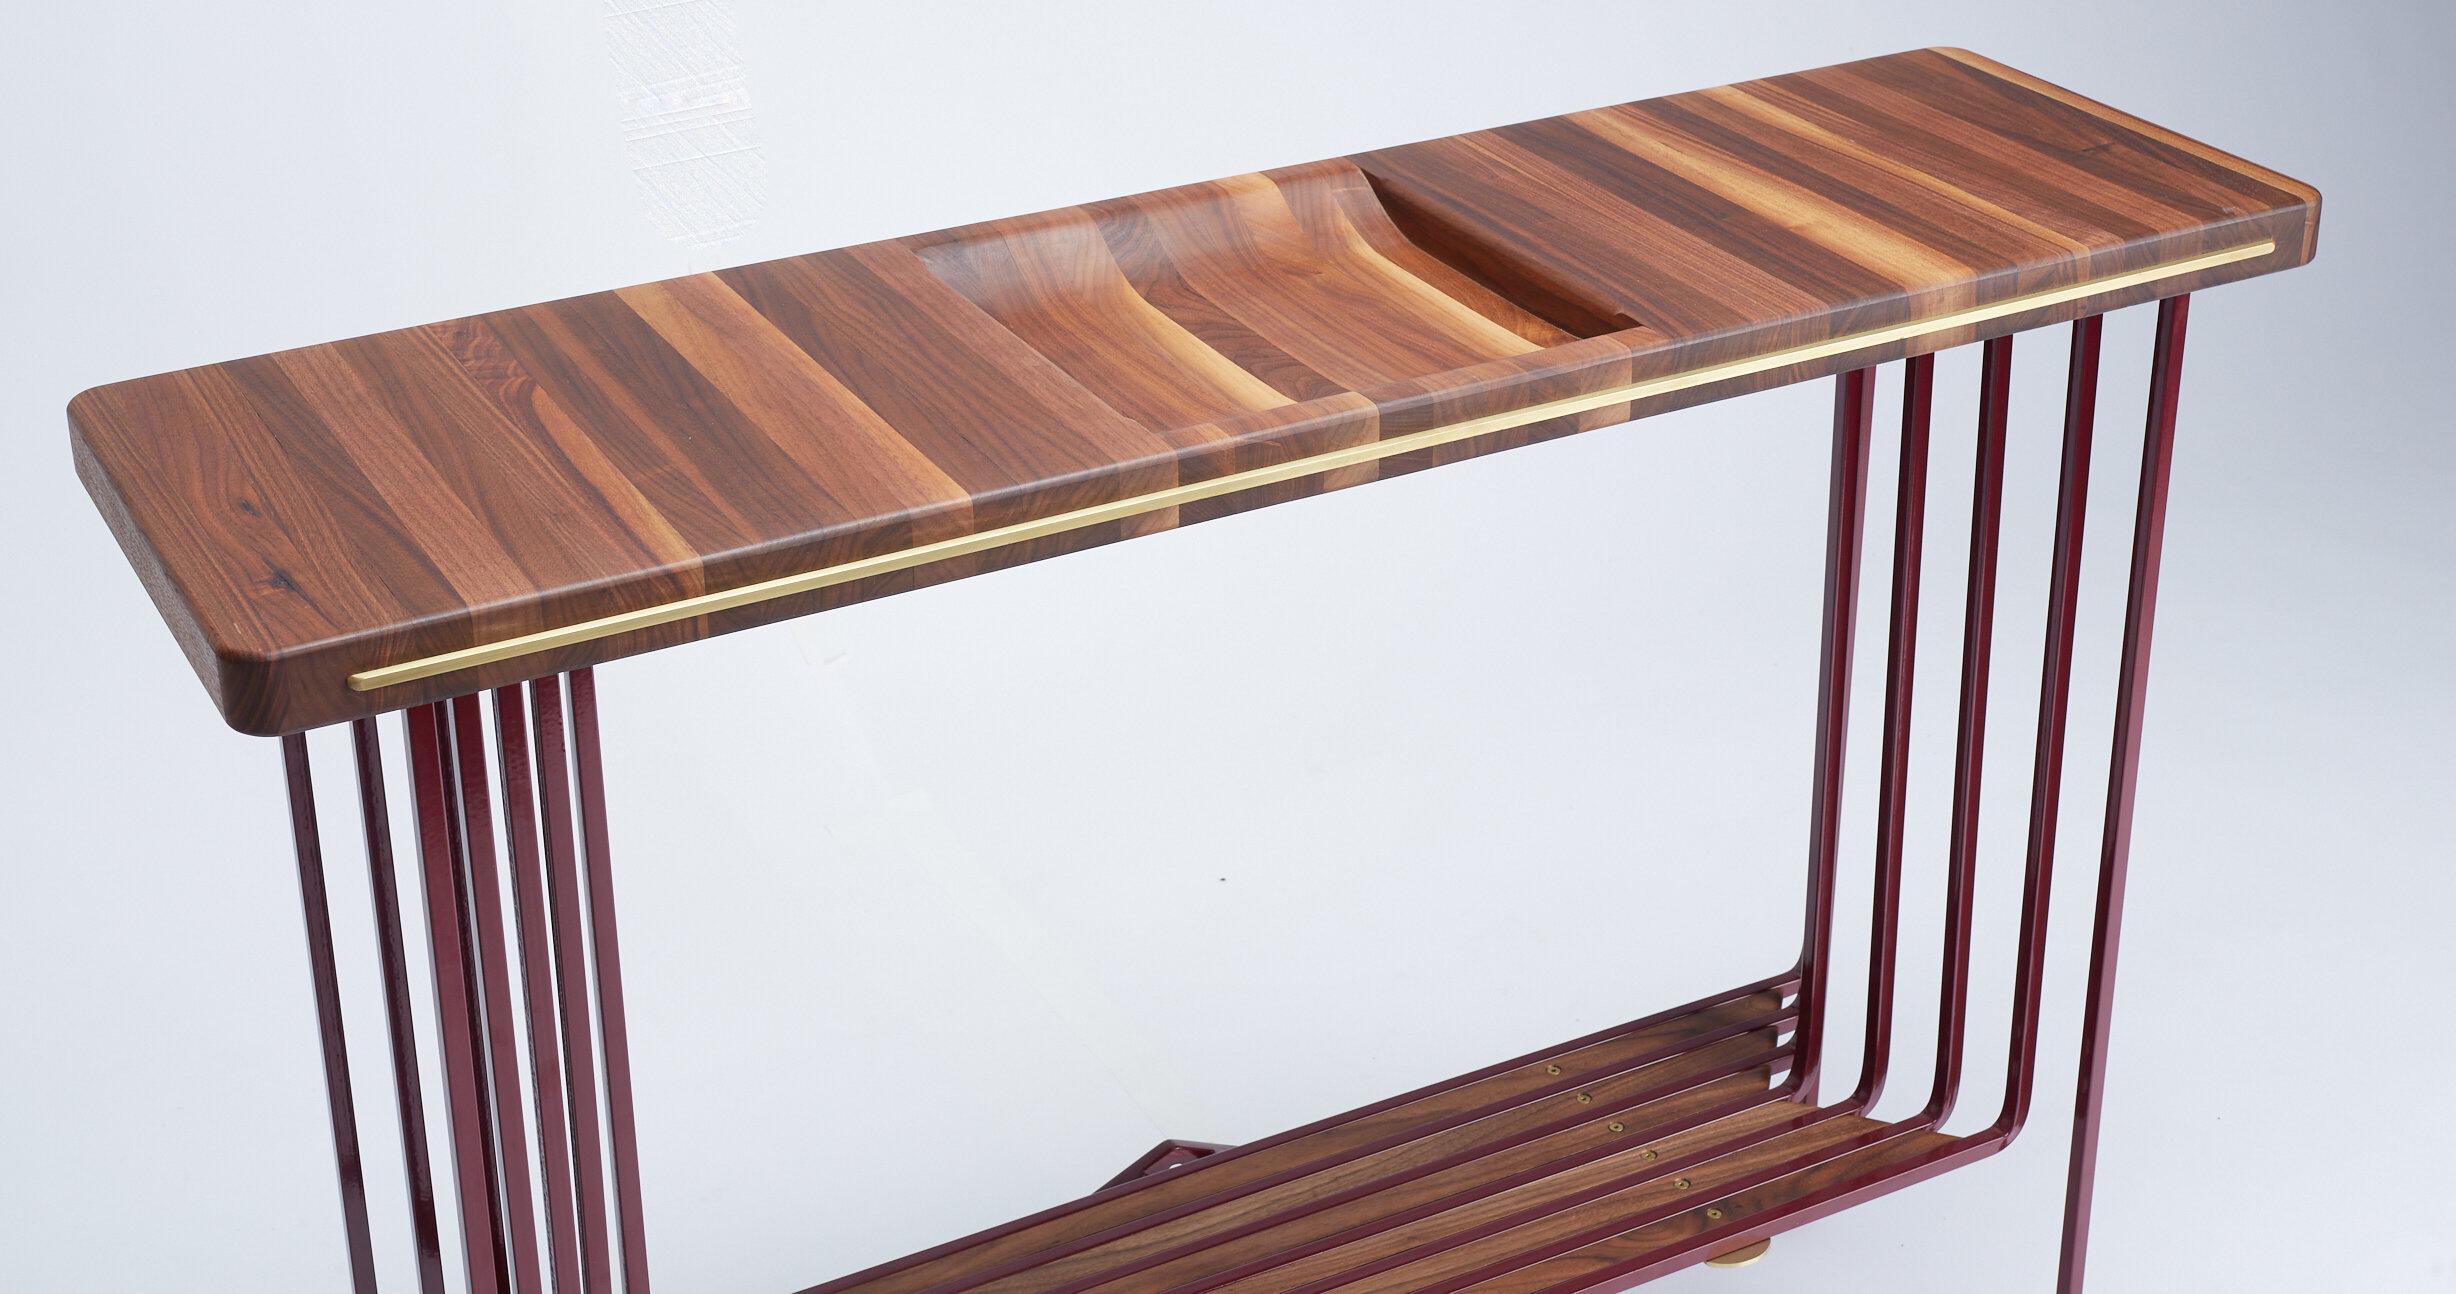 This table has detail from top to bottom. The edge grain American walnut allows us to hand shape a bowl into the top for your every day essentials and the bottom shelf is a perfect place for a plant or your favorite decoration. Brass screws and